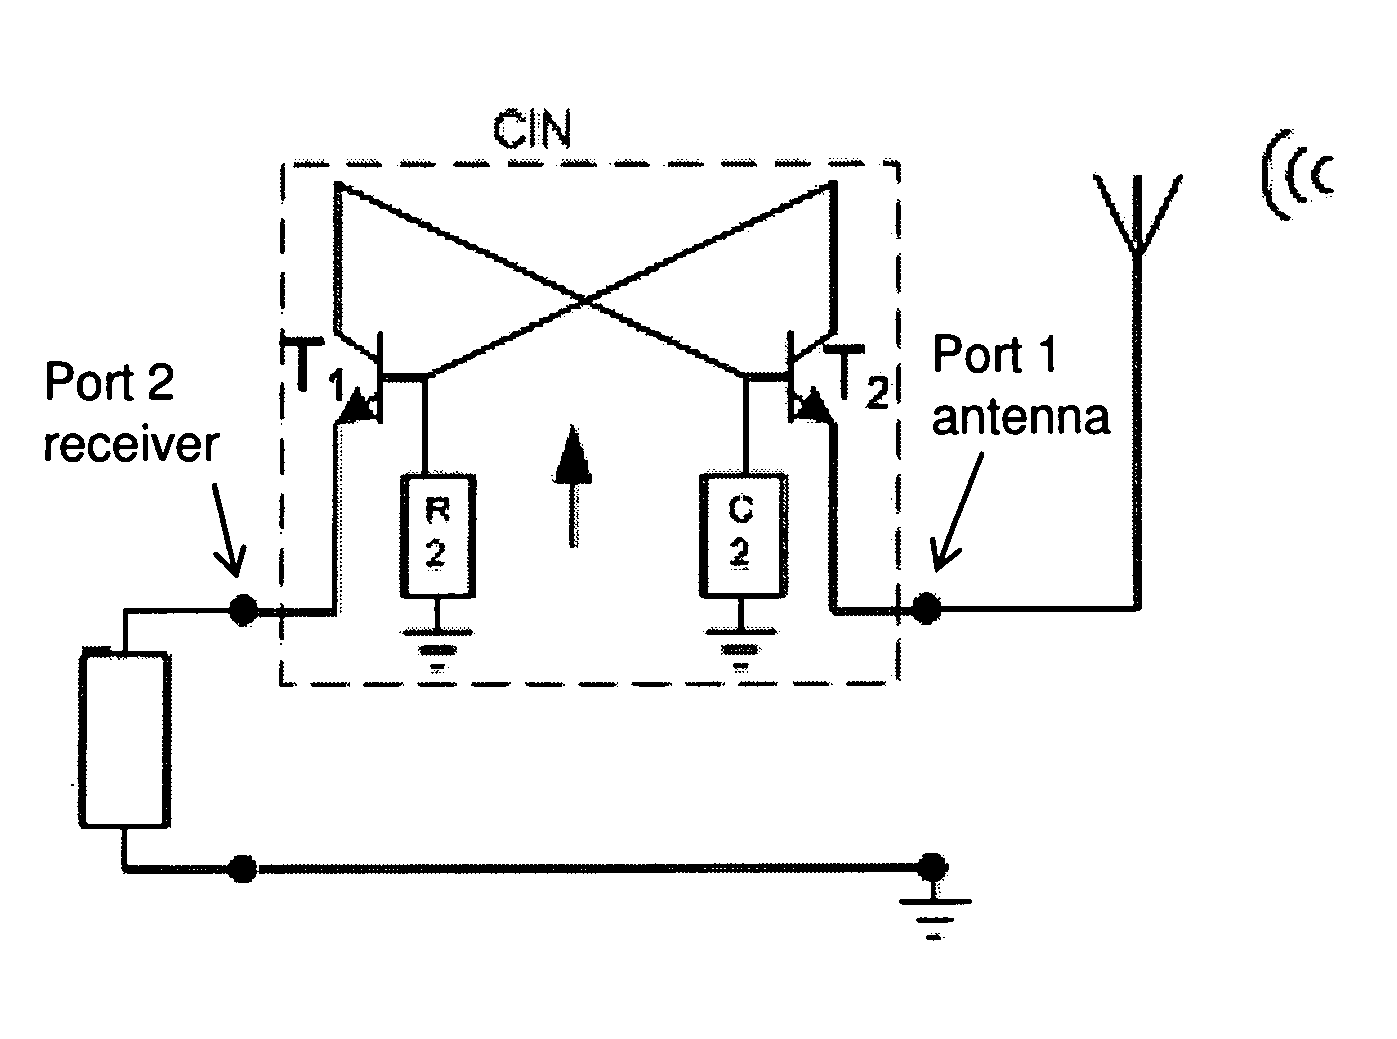 Antenna system comprising an electrically small antenna for reception of UHF band channel signals